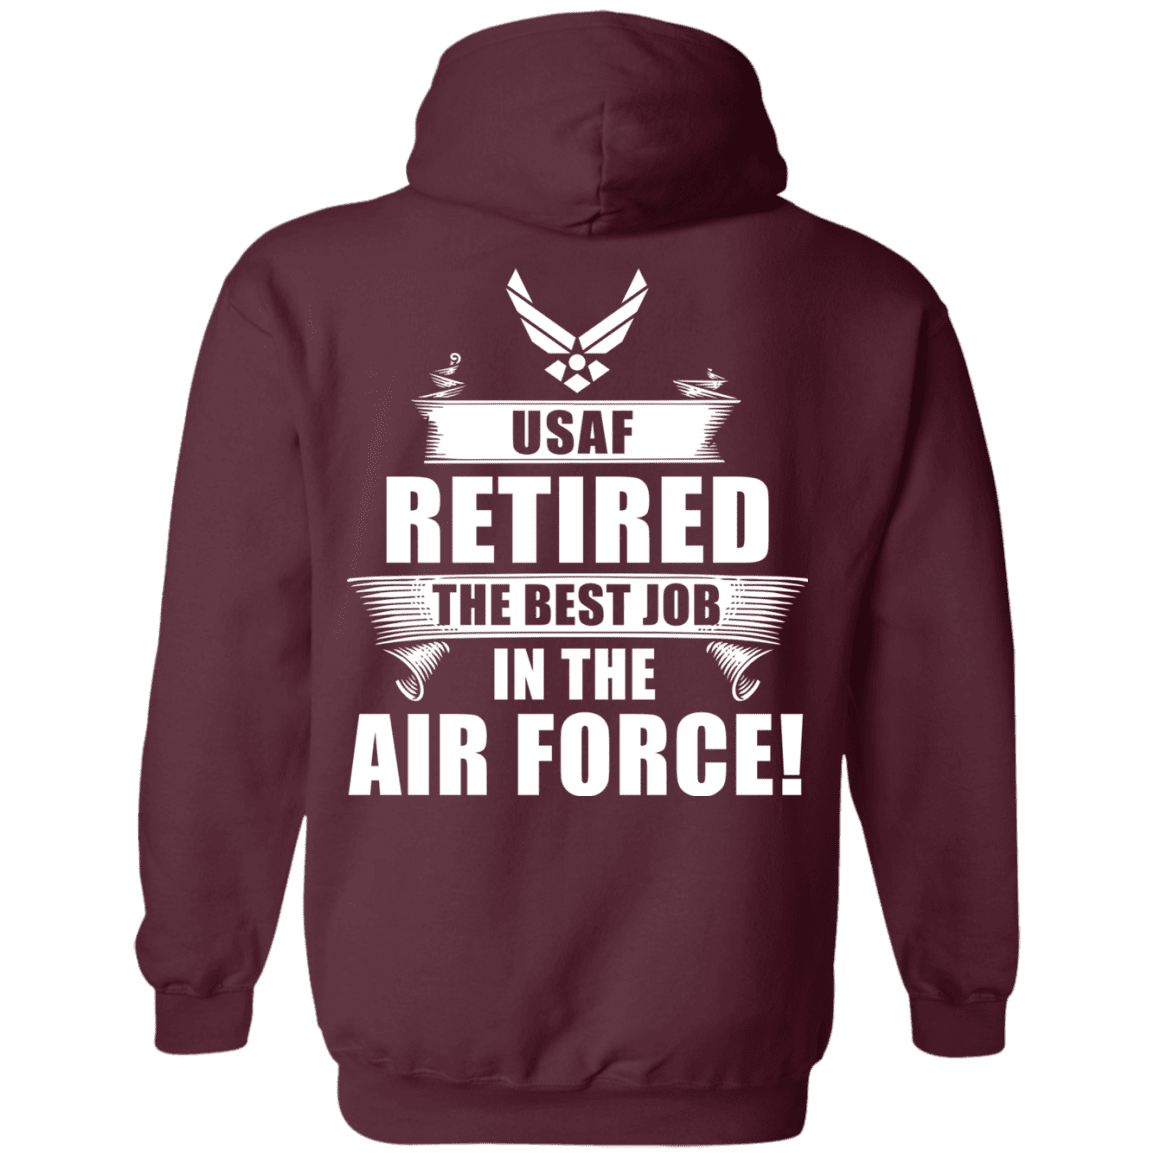 Retired The Best Job in The Air Force Back T Shirts-TShirt-USAF-Veterans Nation